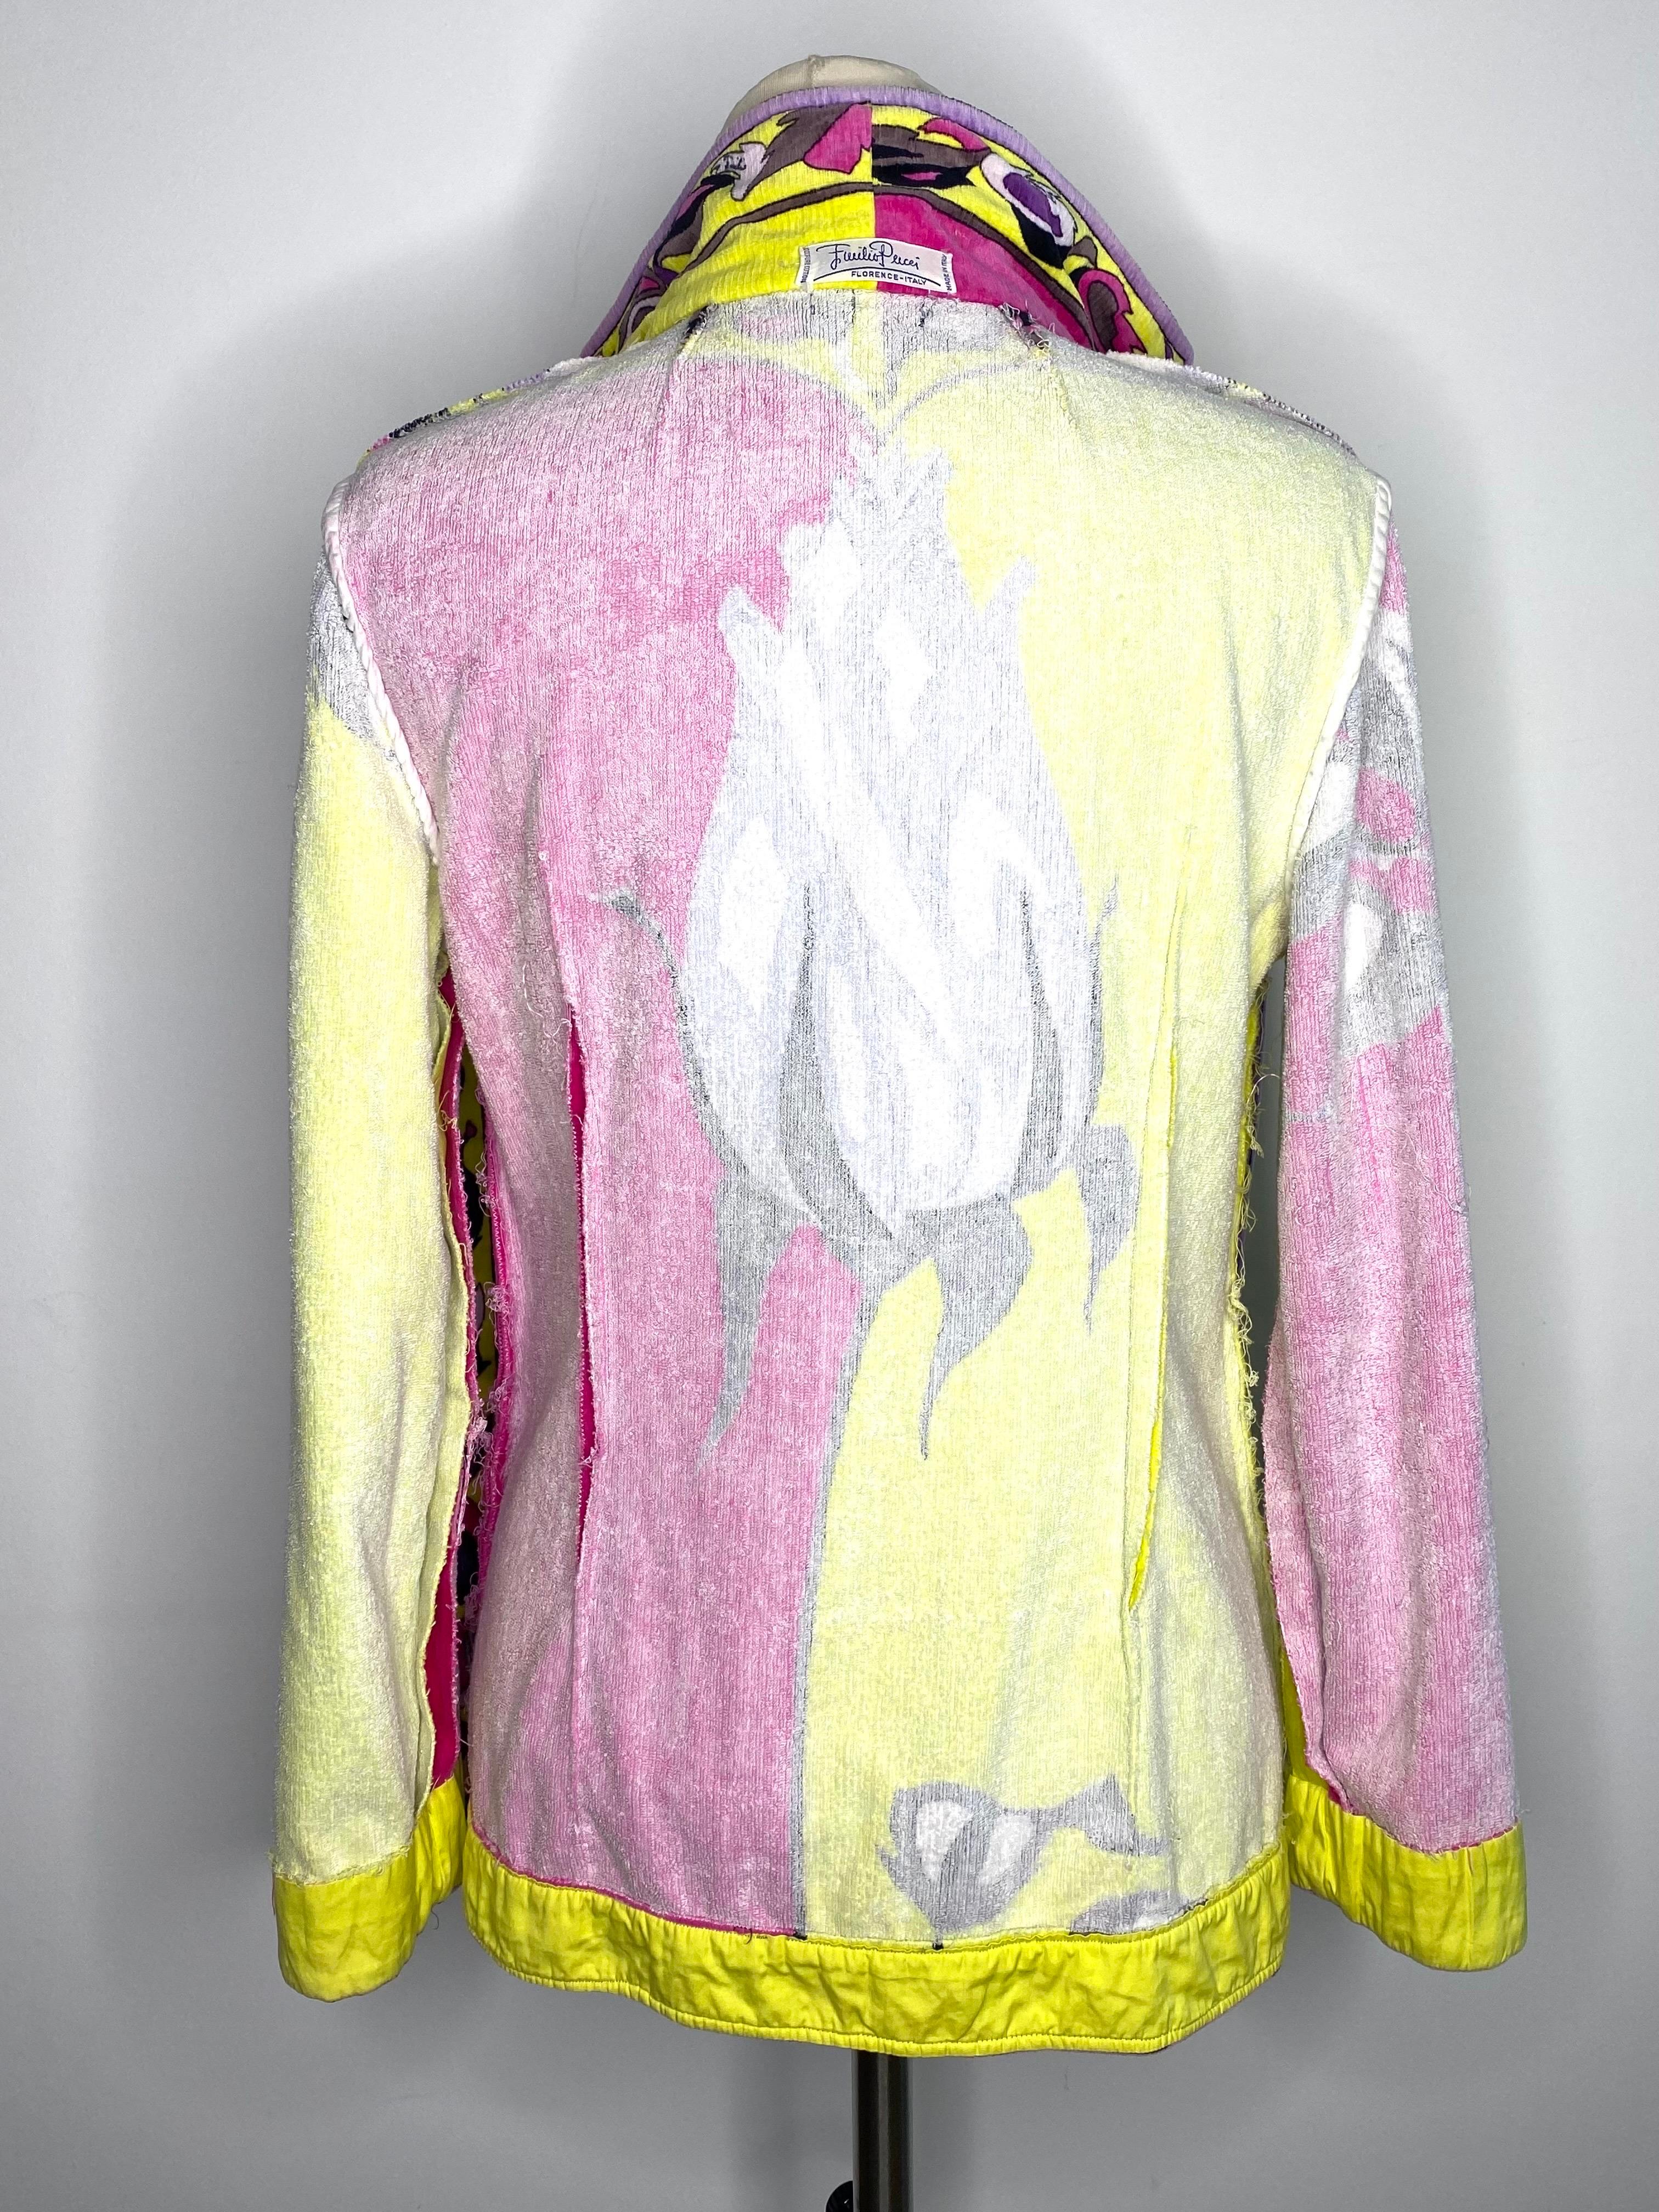 Emilio Pucci velvet jacket circa 1970 single breasted front For Sale 4